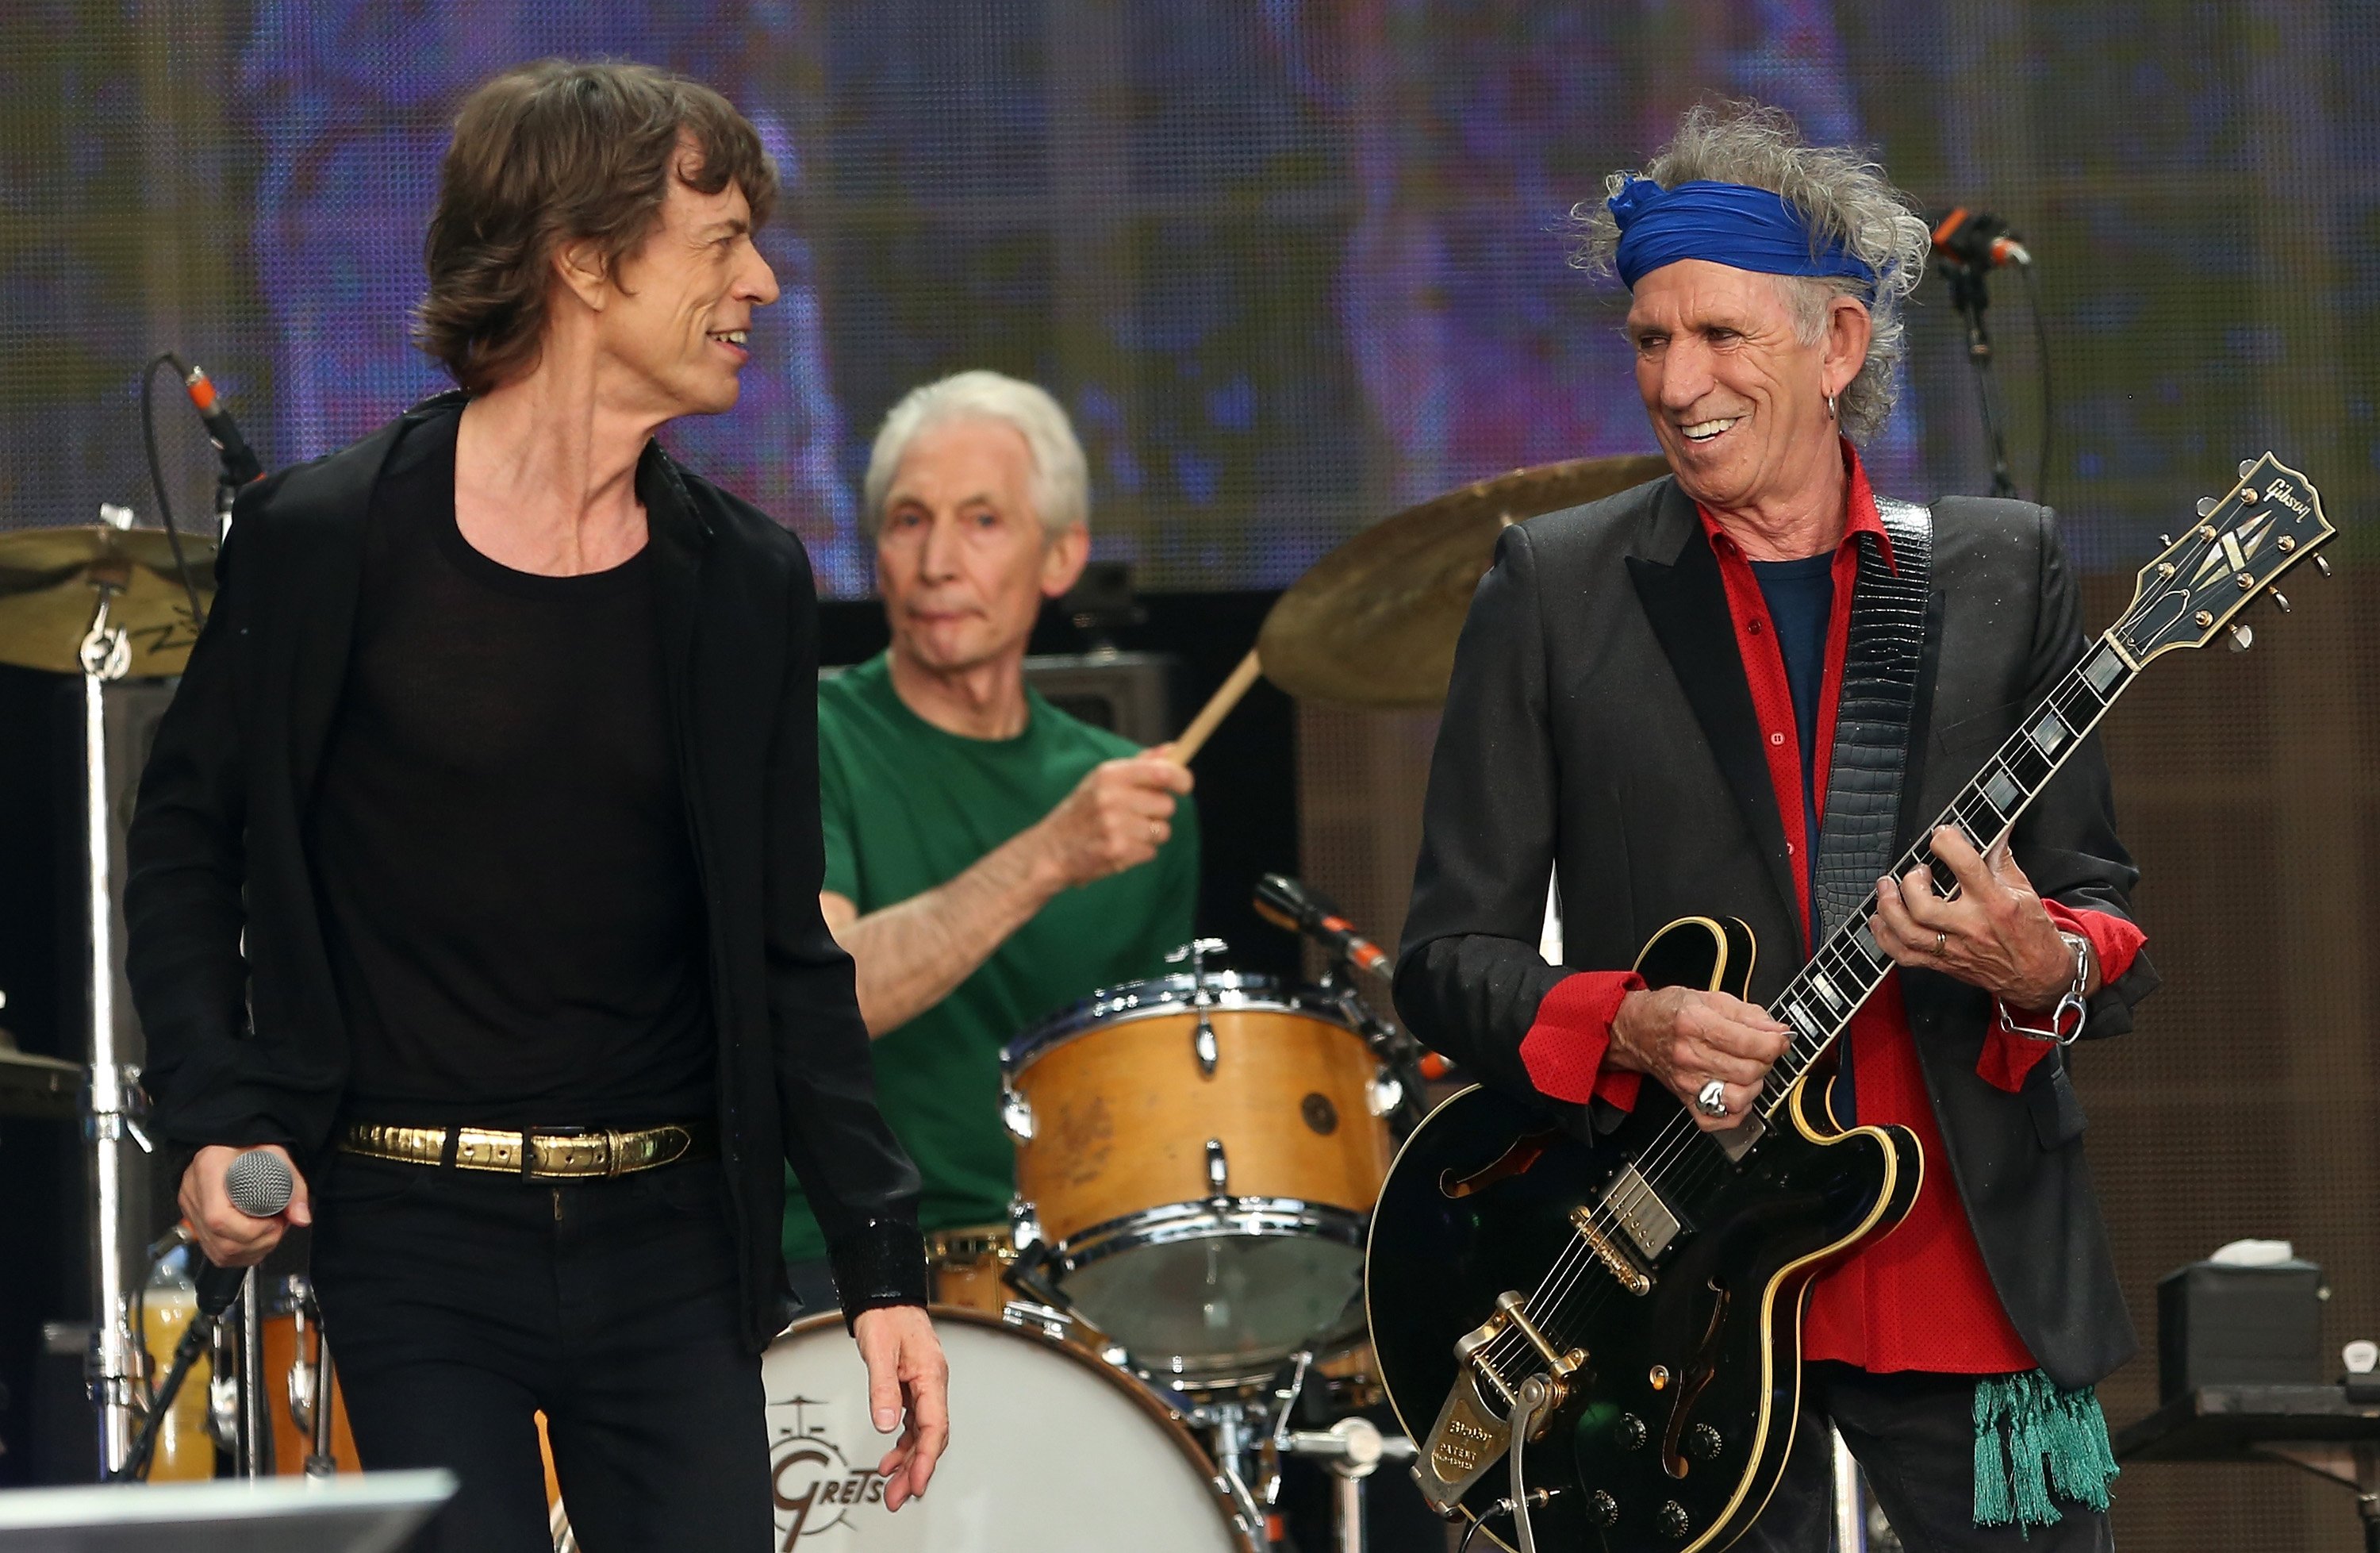 Mick Jagger, Keith Richards, and Charlie Watts perform with The Rolling Stones at Hyde Park in London, England, in 2013